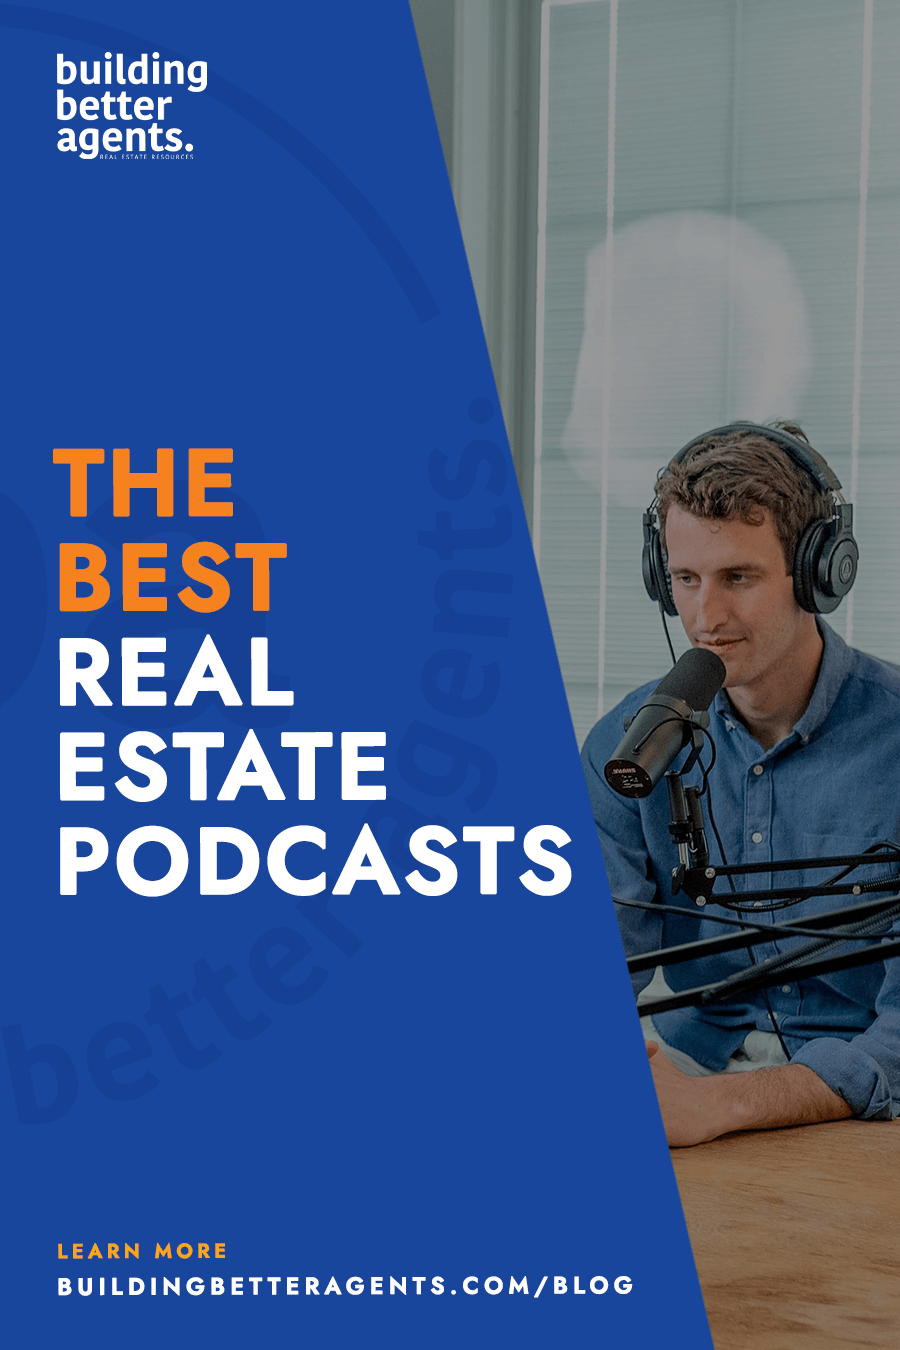 Just tune into the best real estate podcasts.